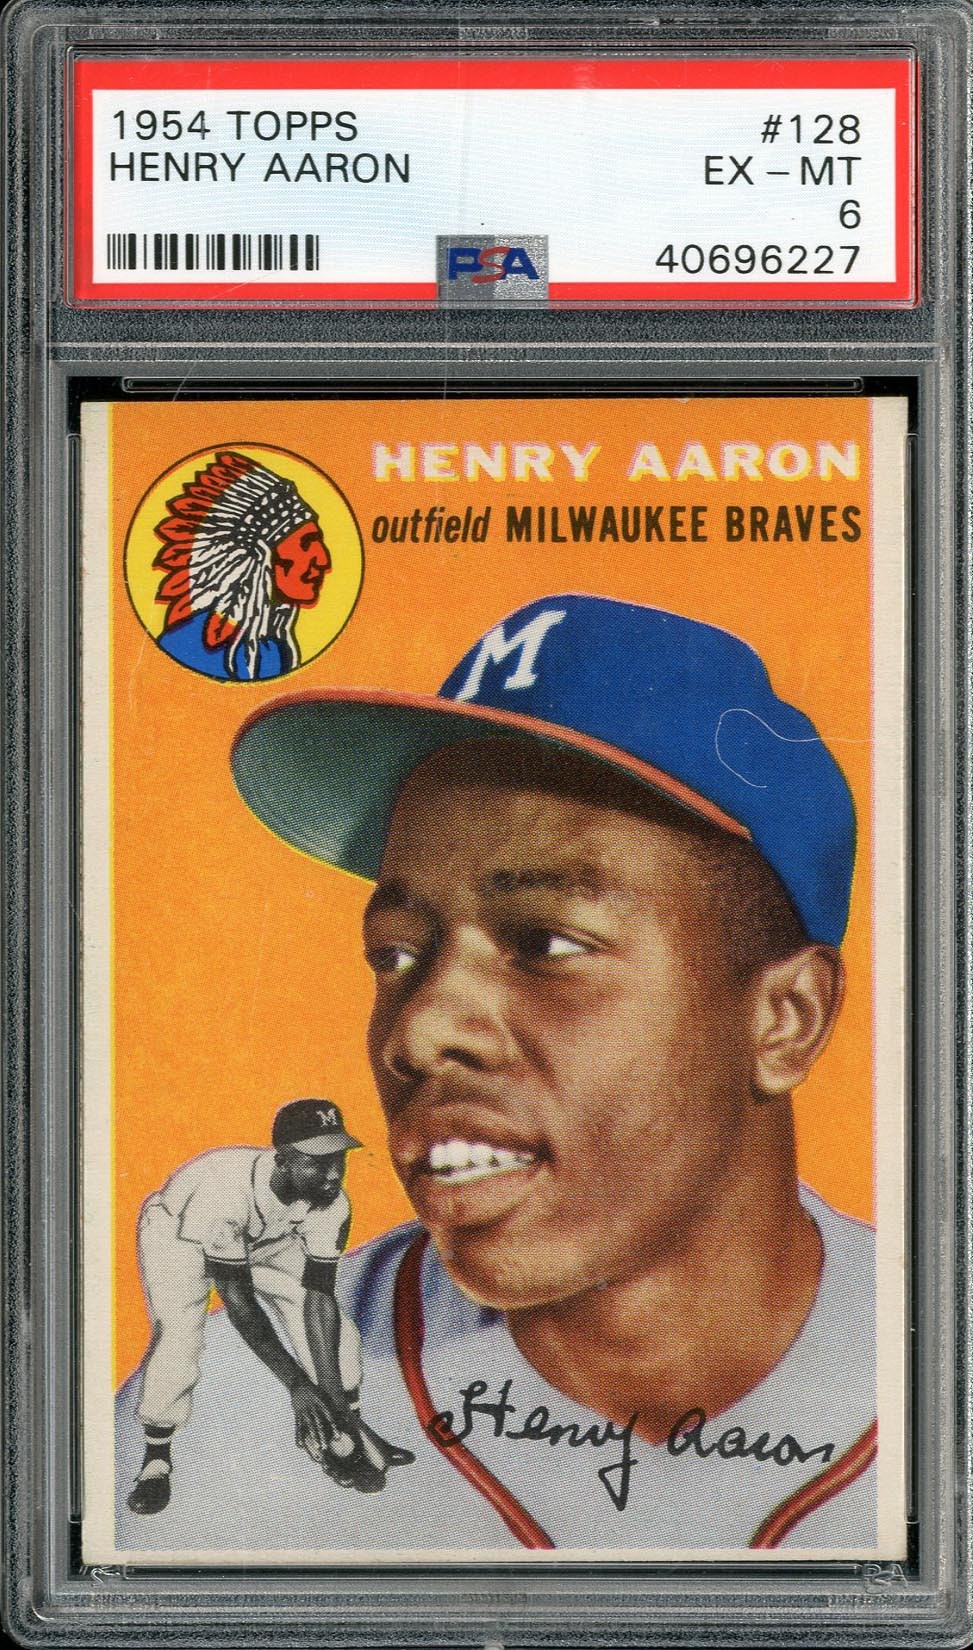 Baseball and Trading Cards - 1954 Topps #128 Henry Aaron Rookie Card - PSA EX-MT 6